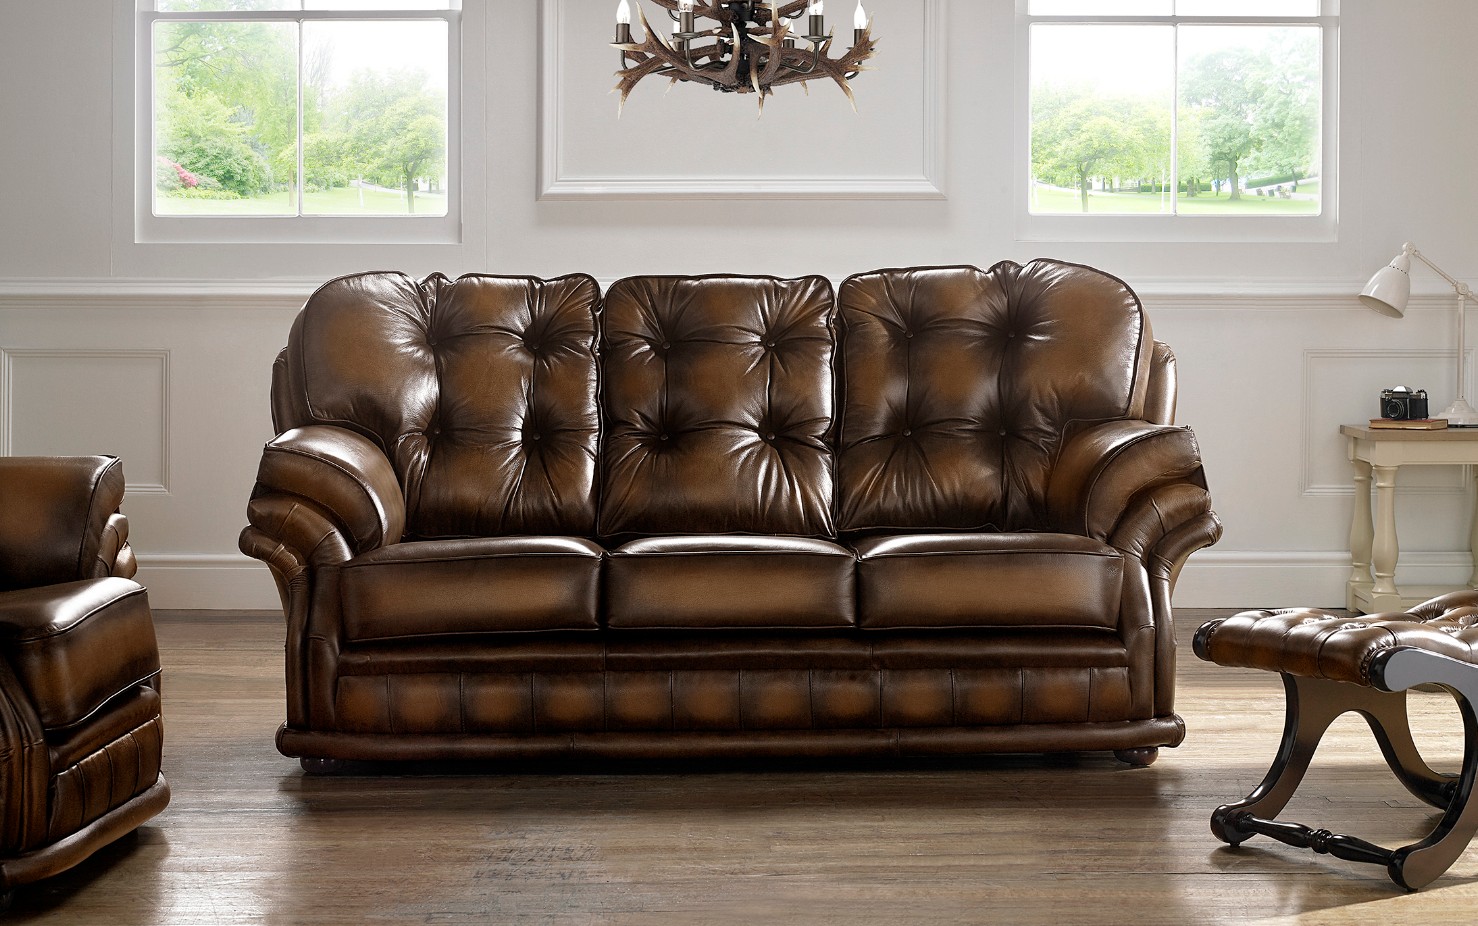 Product photograph of Chesterfield Antique Autumn Tan Leather Sofa Suite In Knightsbr Idge Style from Chesterfield Sofas